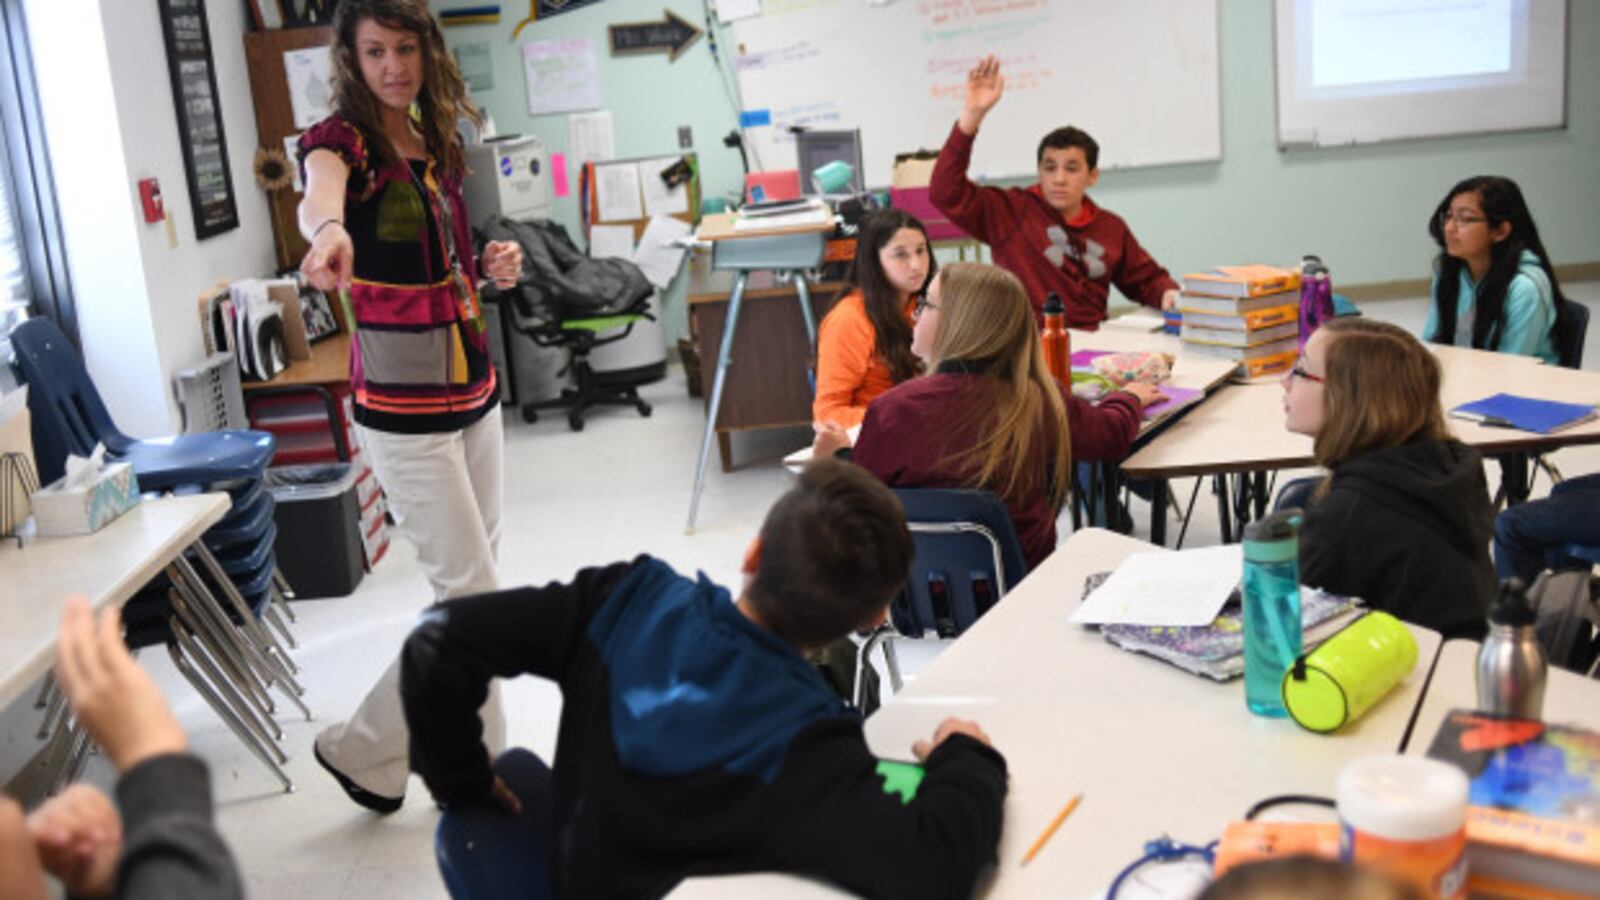 Stephanie Wujek teaches science at Wiggins Middle School, on April 5, 2017 in Wiggins, Colorado. A woman with shoulder-length brown hair stands at the front of the classroom and points to a student. Other students sit at tables, and one in a red hoodie raises their hand.